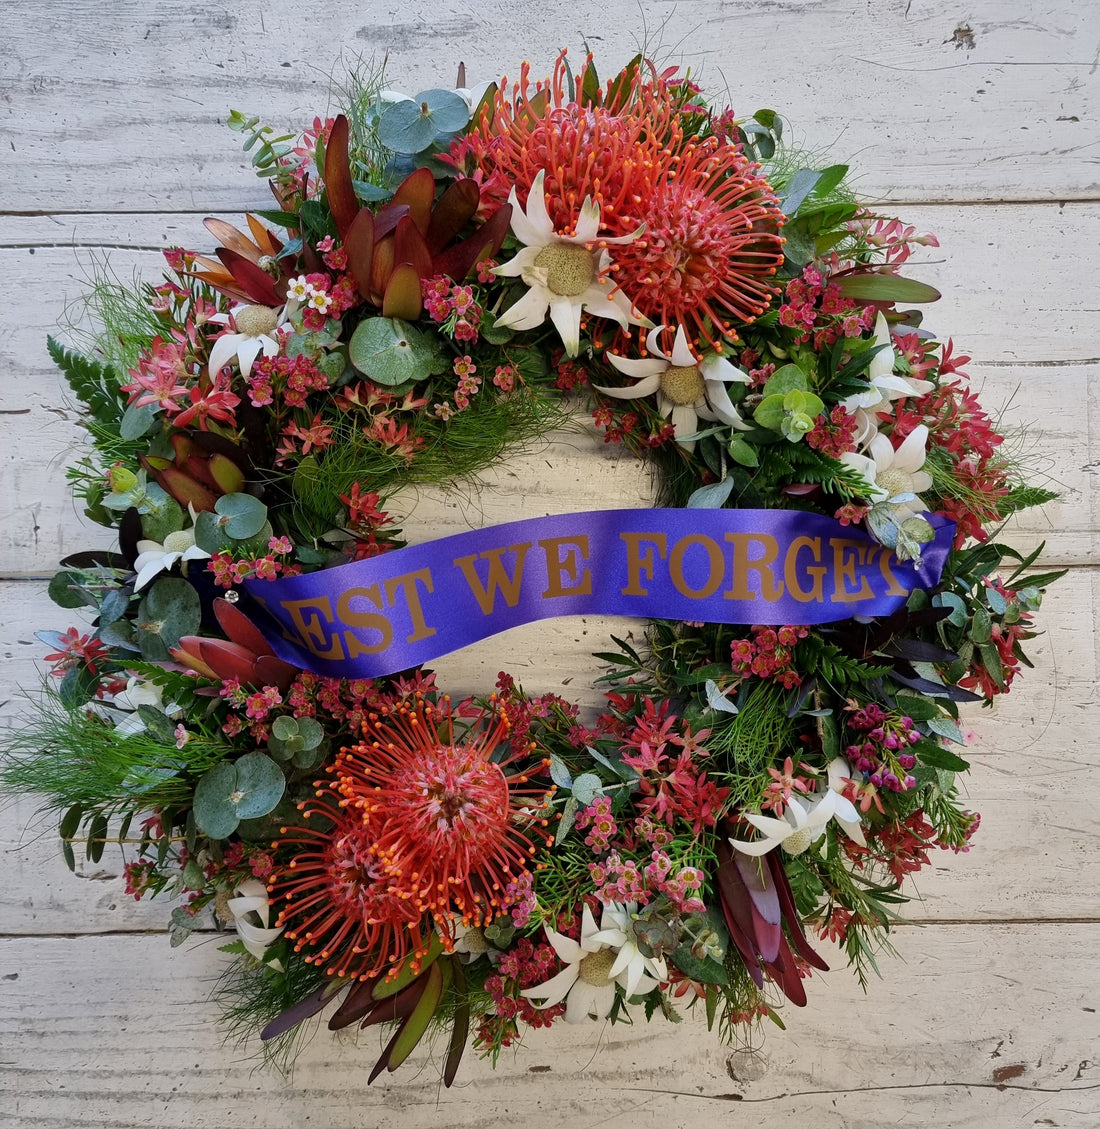 Remembrance day flower wreath